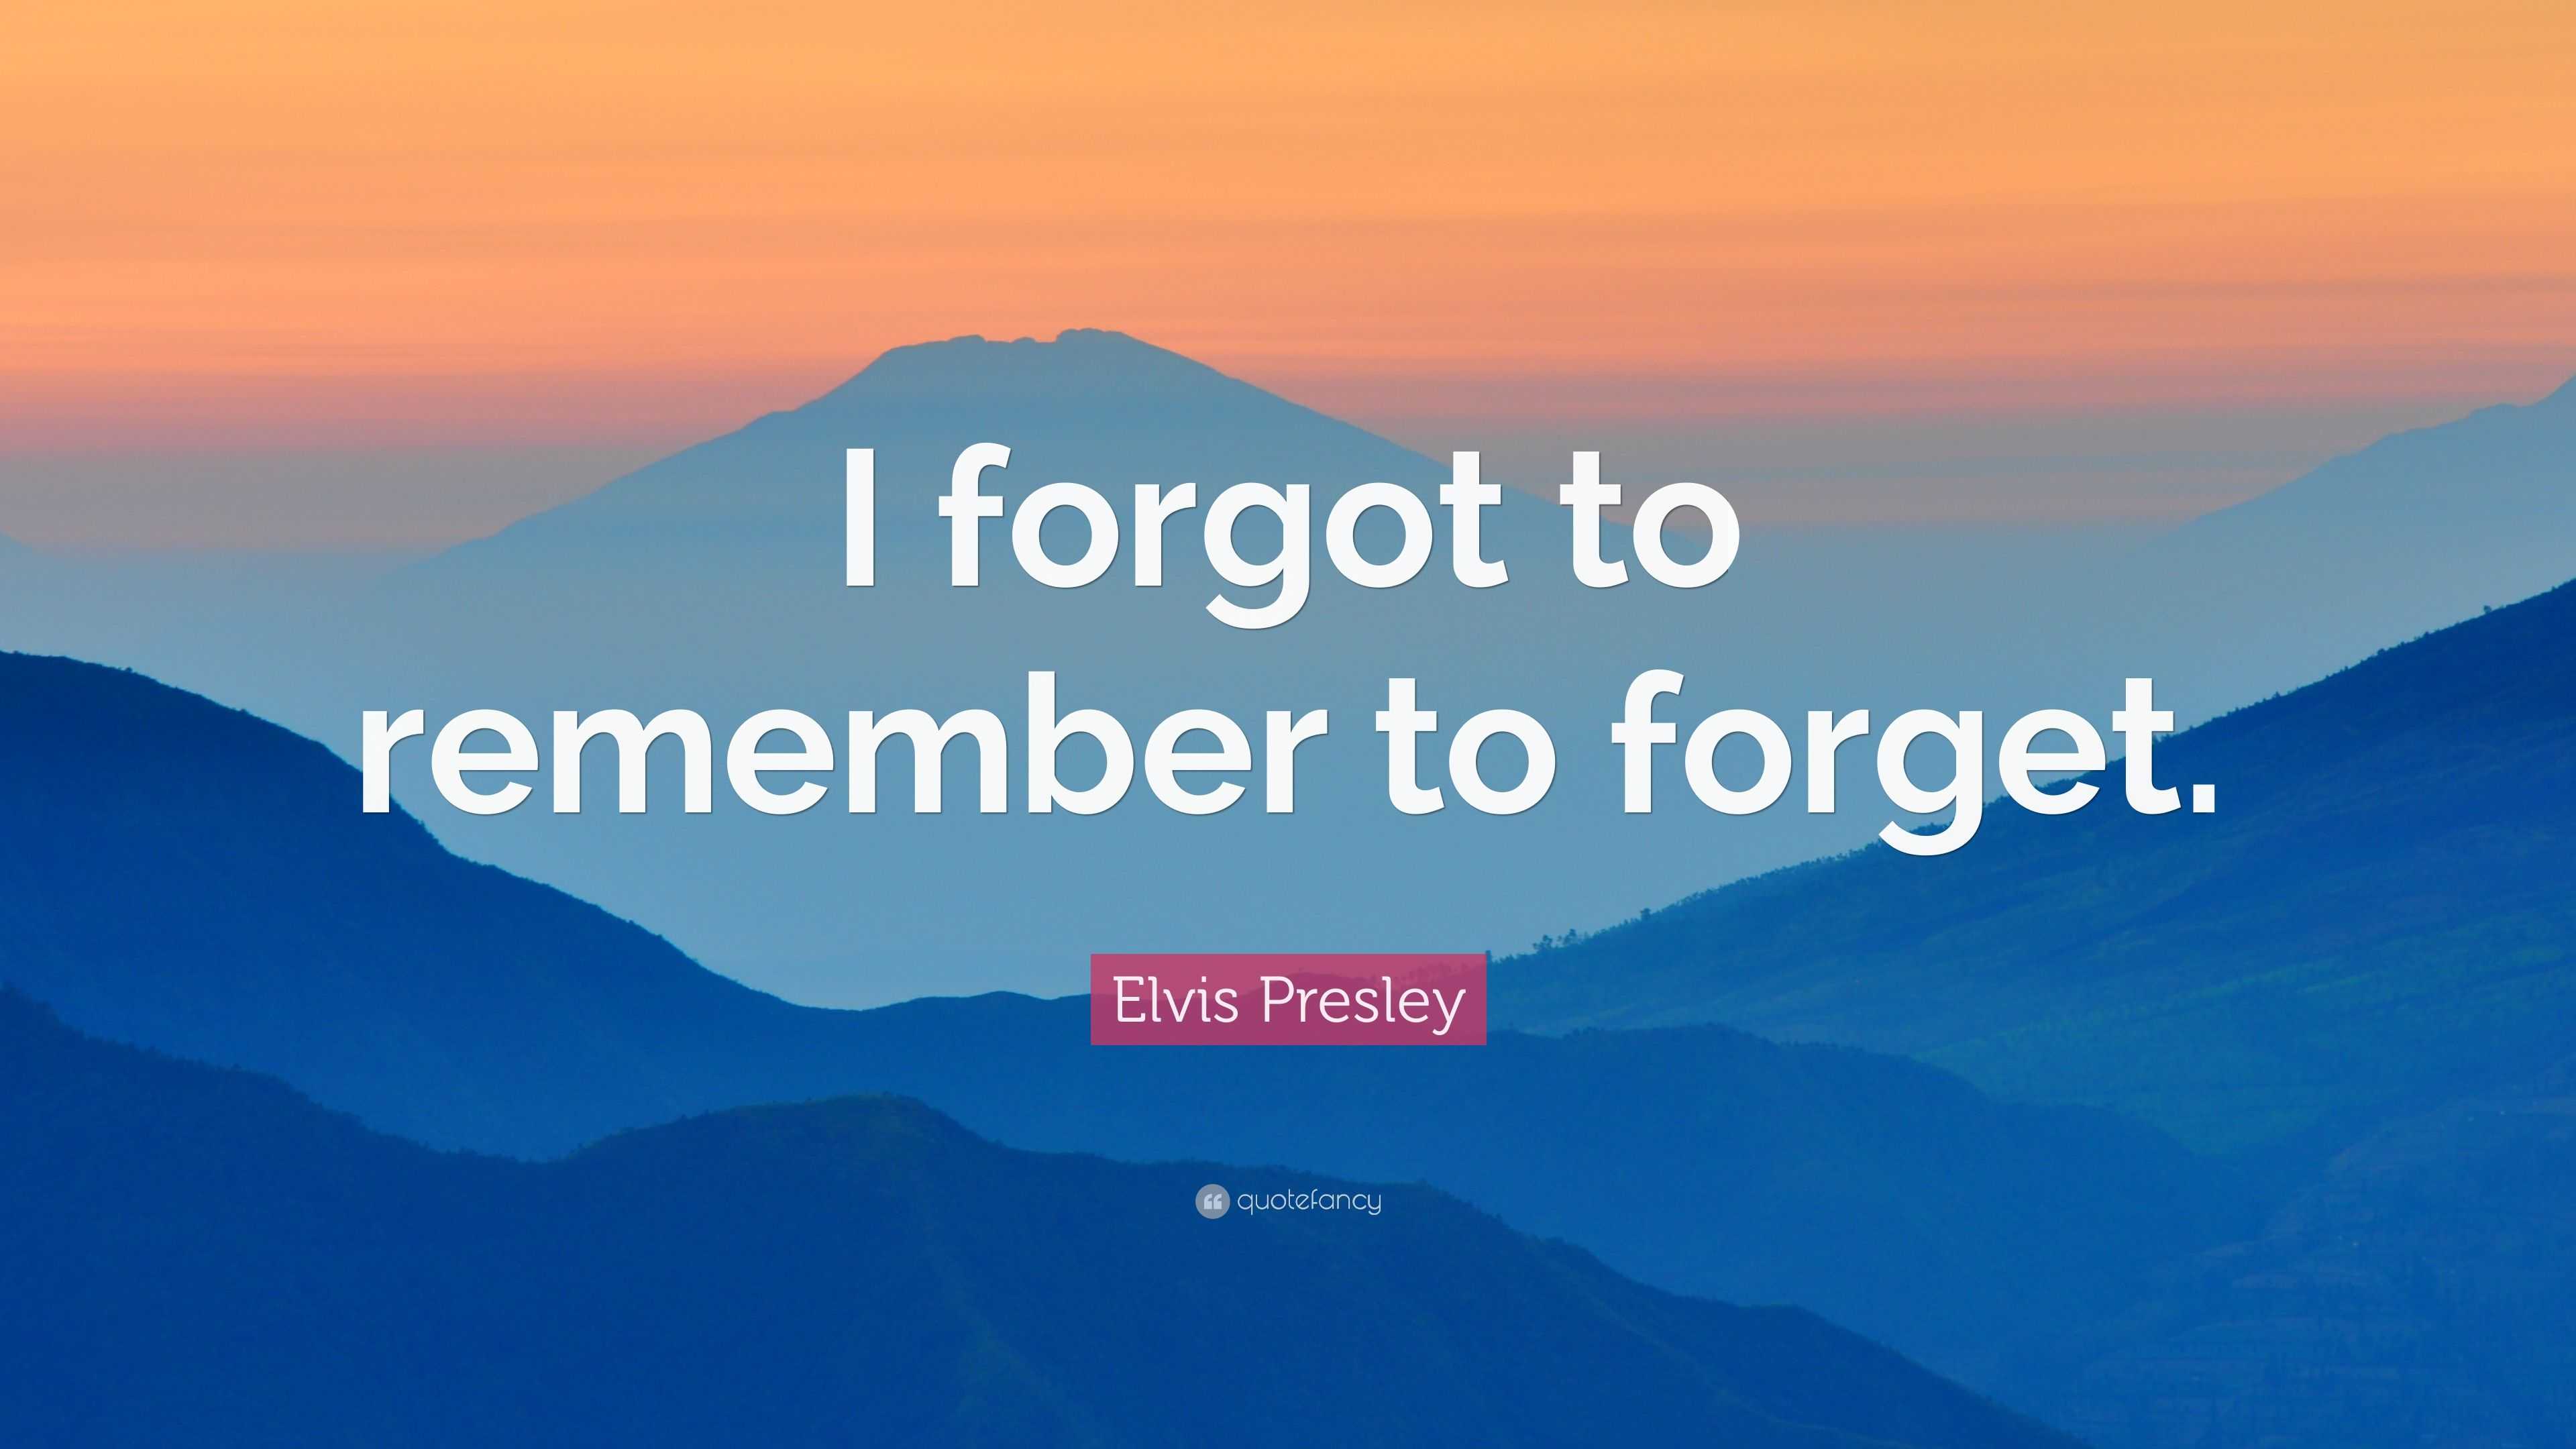 Elvis Presley quote: I forgot to remember to forget.